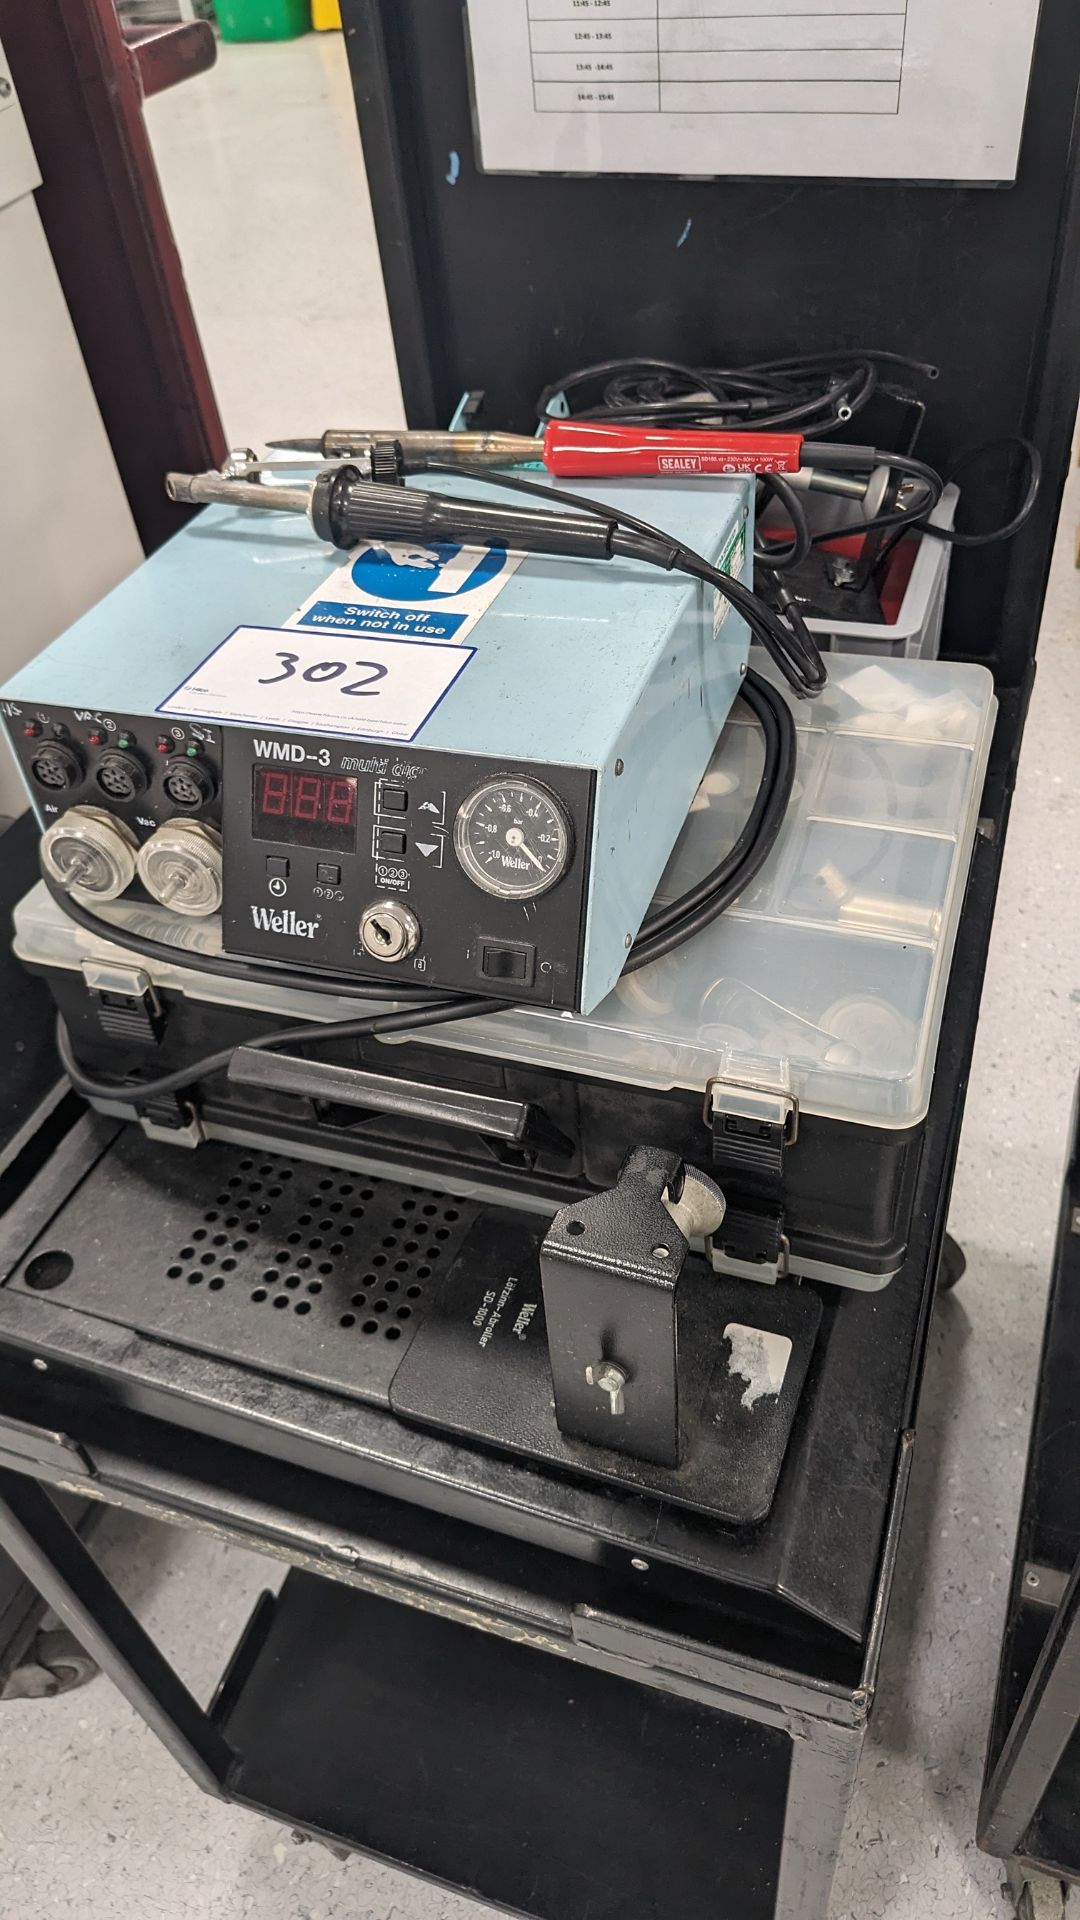 Weller WMD-3 soldering unit with associated equipment as lotted